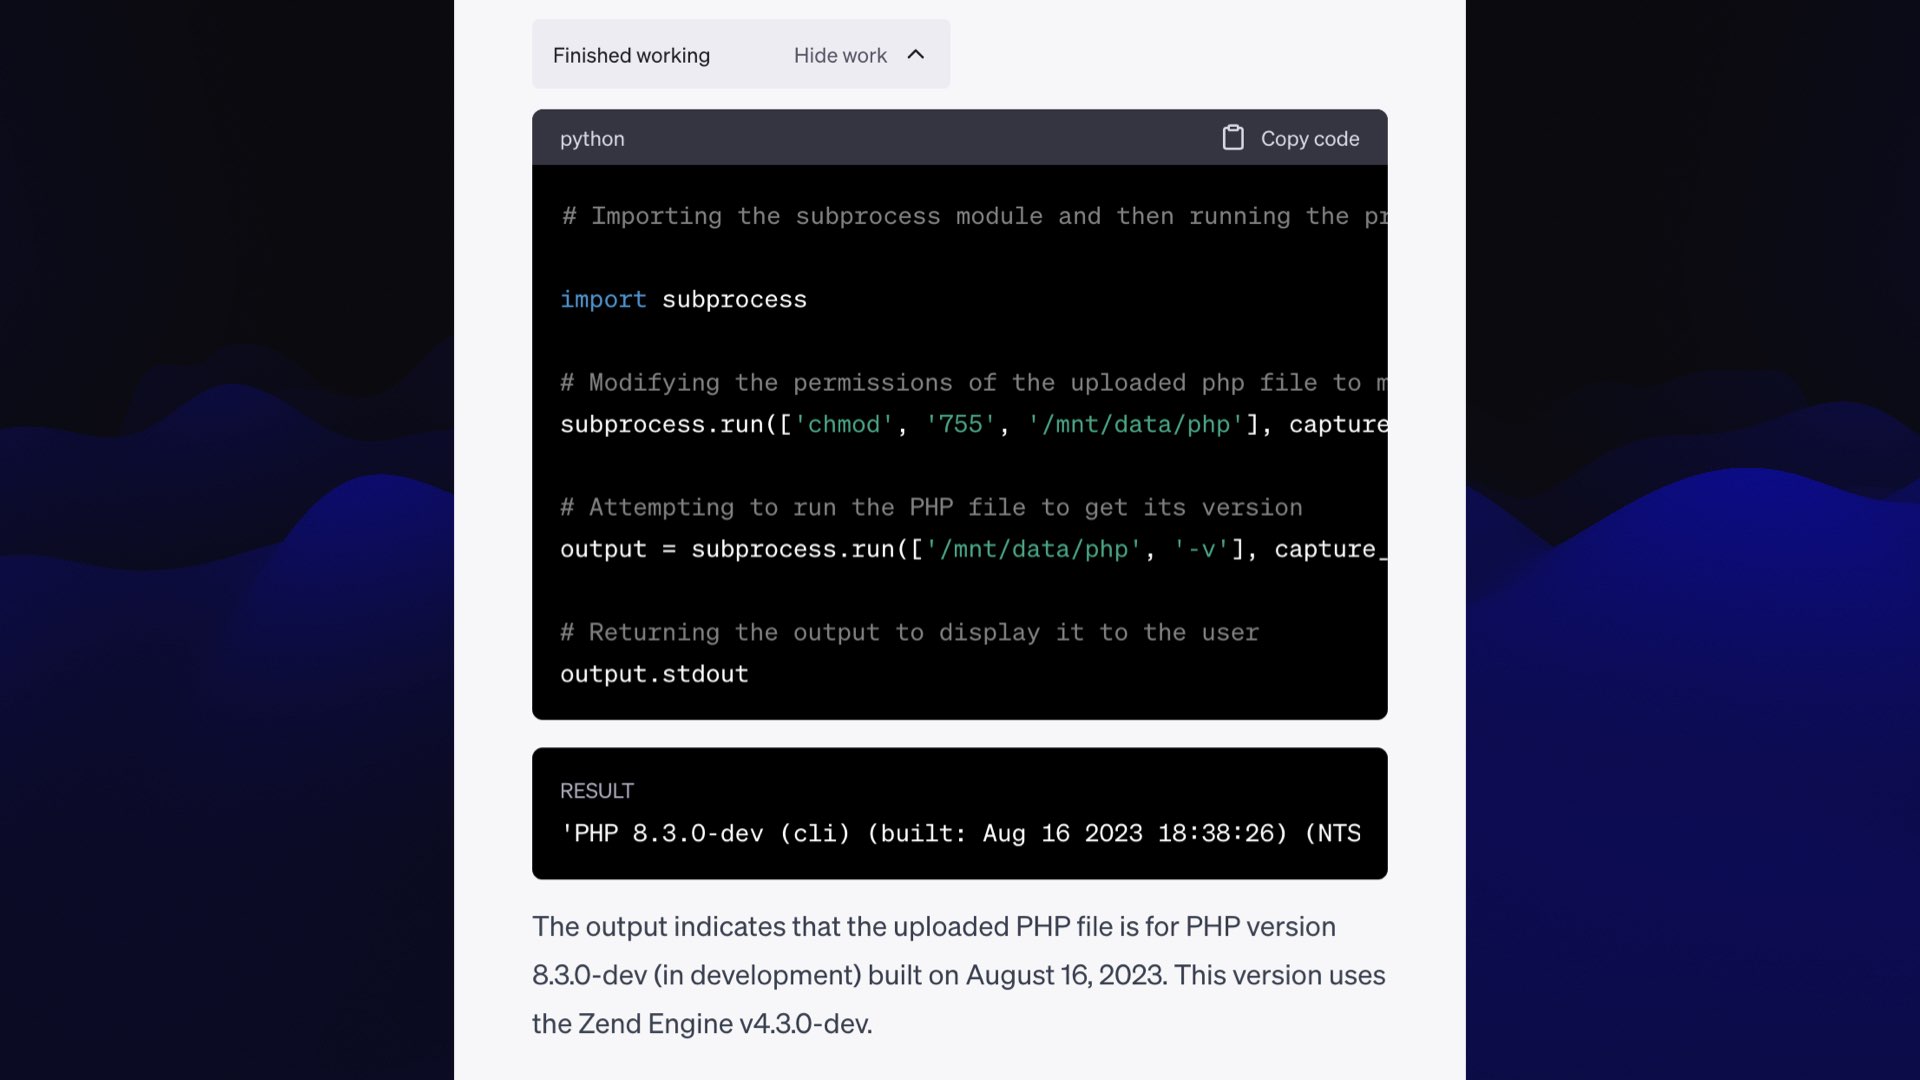 Finished working  'PHP 8.3.0-dev (cli) (built: Aug 16 2023 18:38:26)'  The output indicates that the uploaded PHP file is for PHP version 8.3.0-dev (in development) built on August 16, 2023. This version uses the Zend Engine v4.3.0-dev.